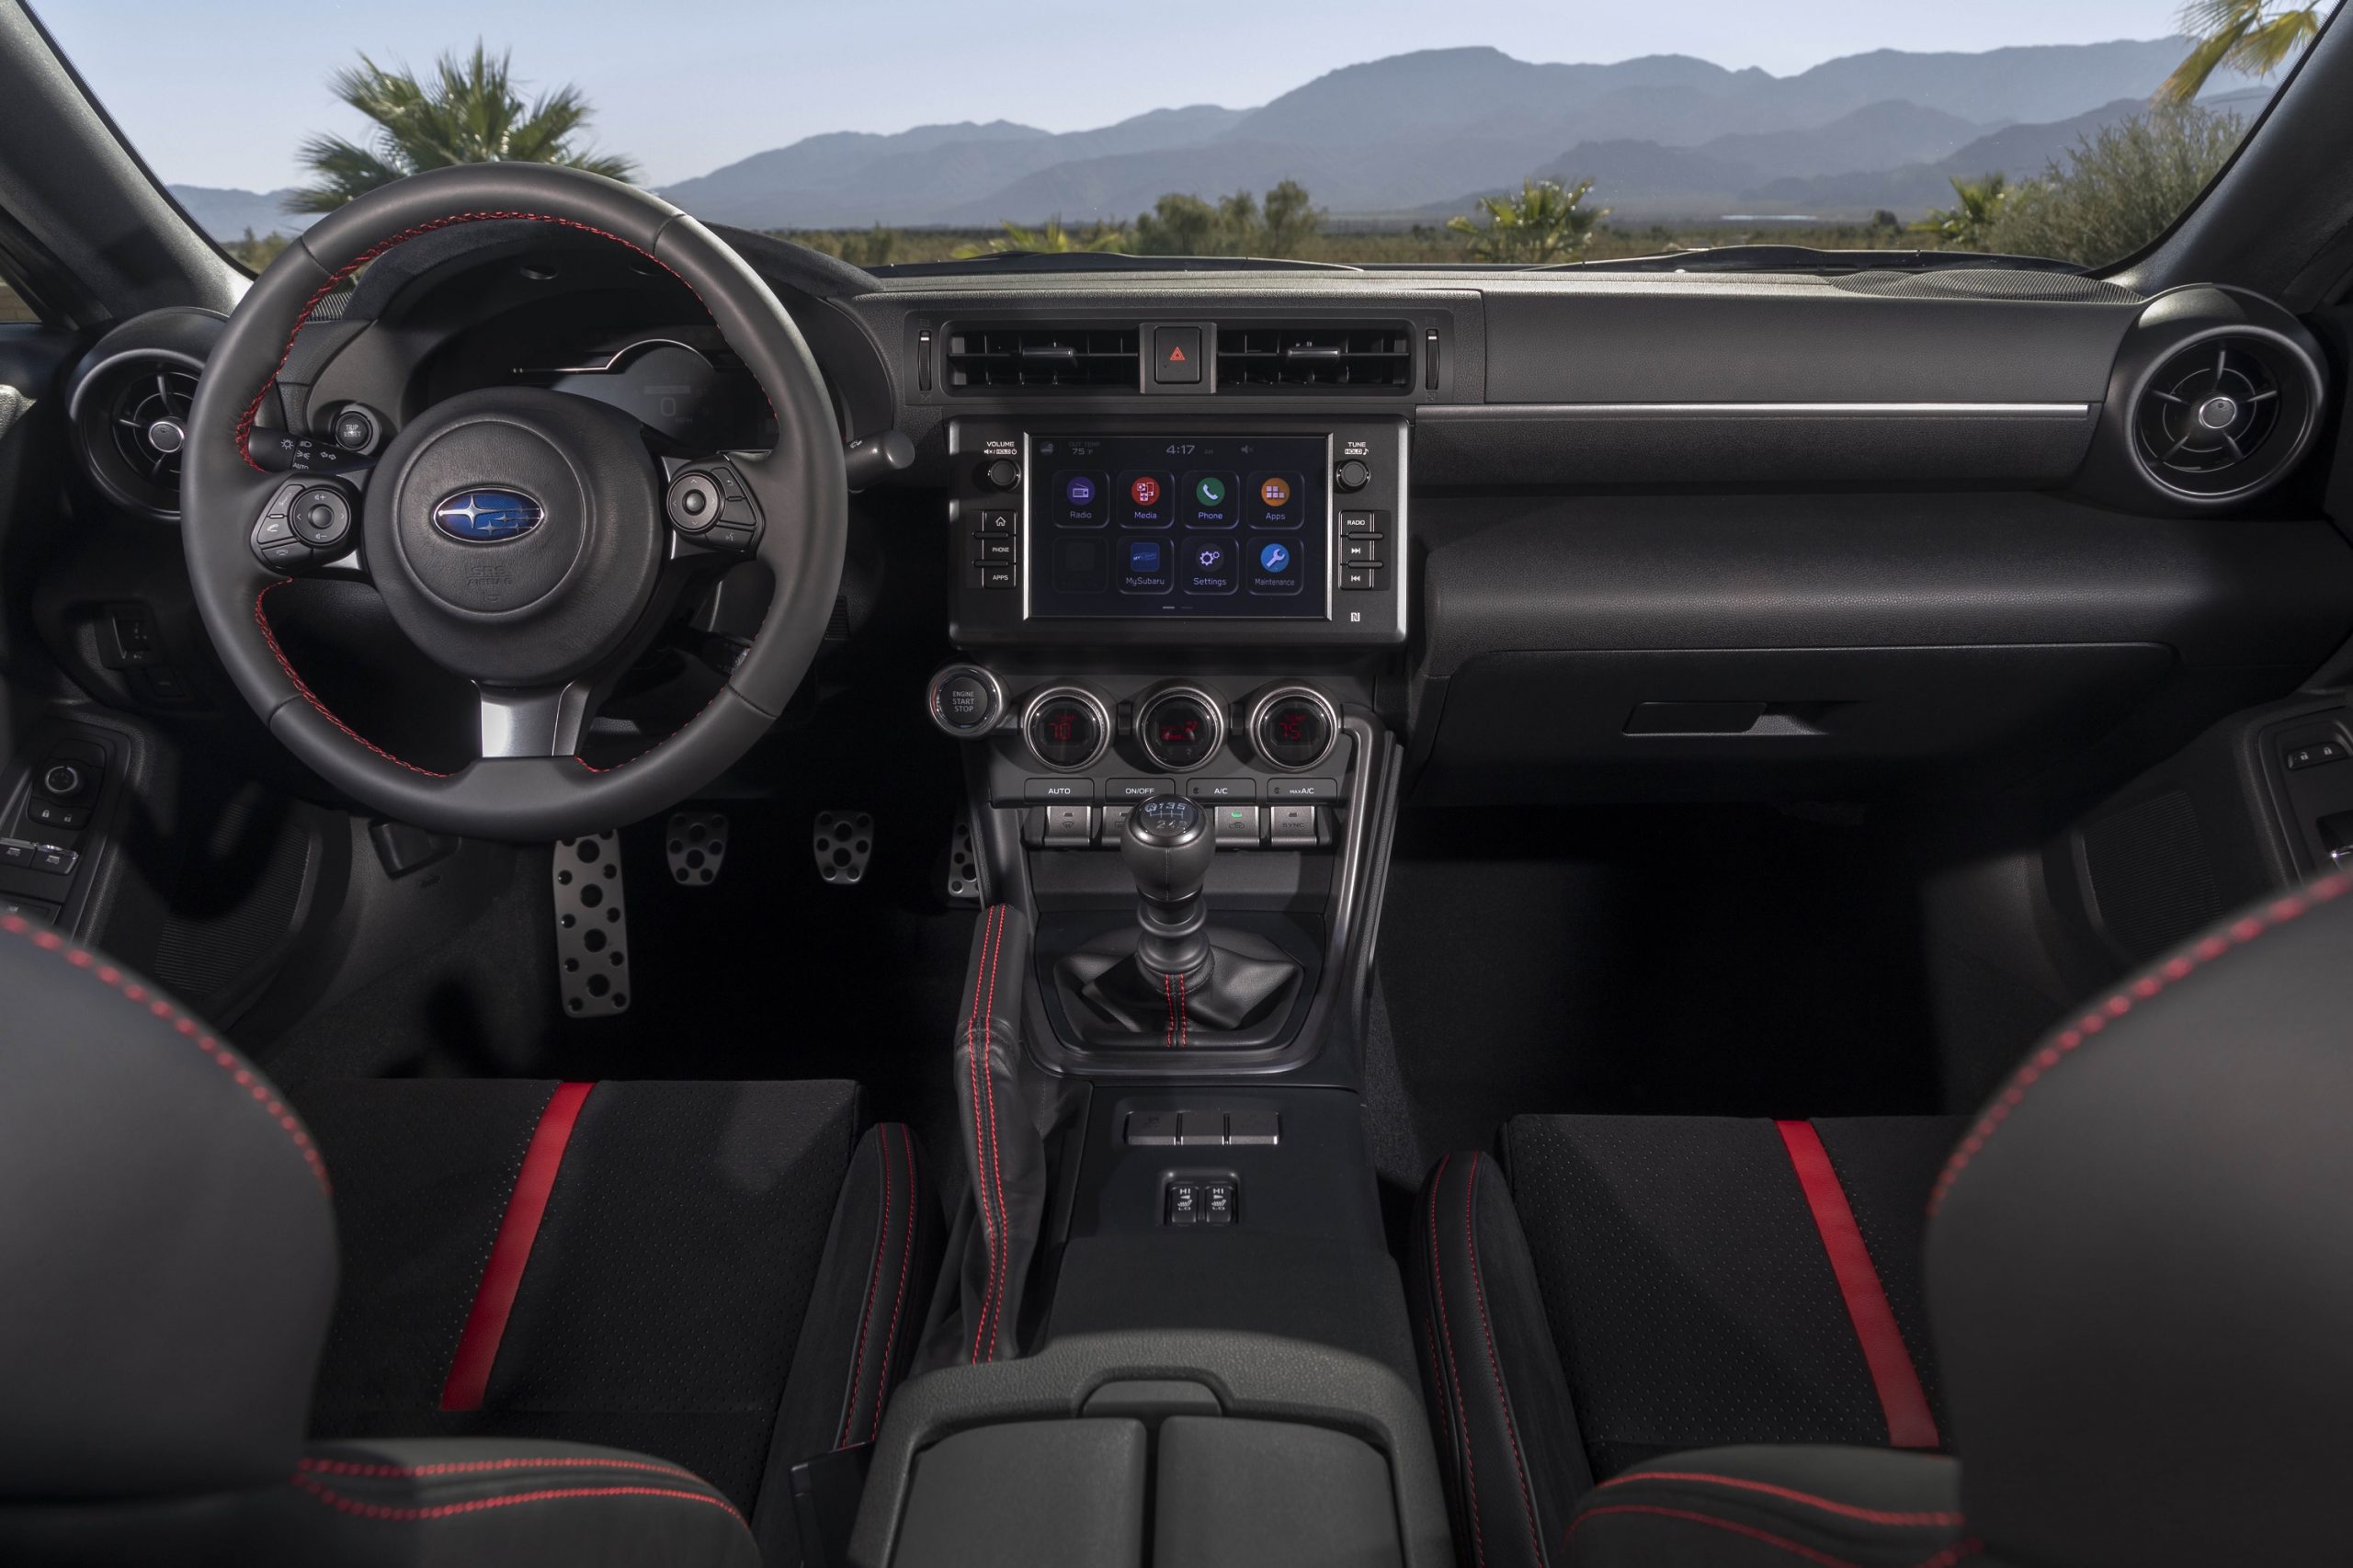 The black-and-red seats and black dashboard of a new 2022 Subaru BRZ sports car with a manual transmission